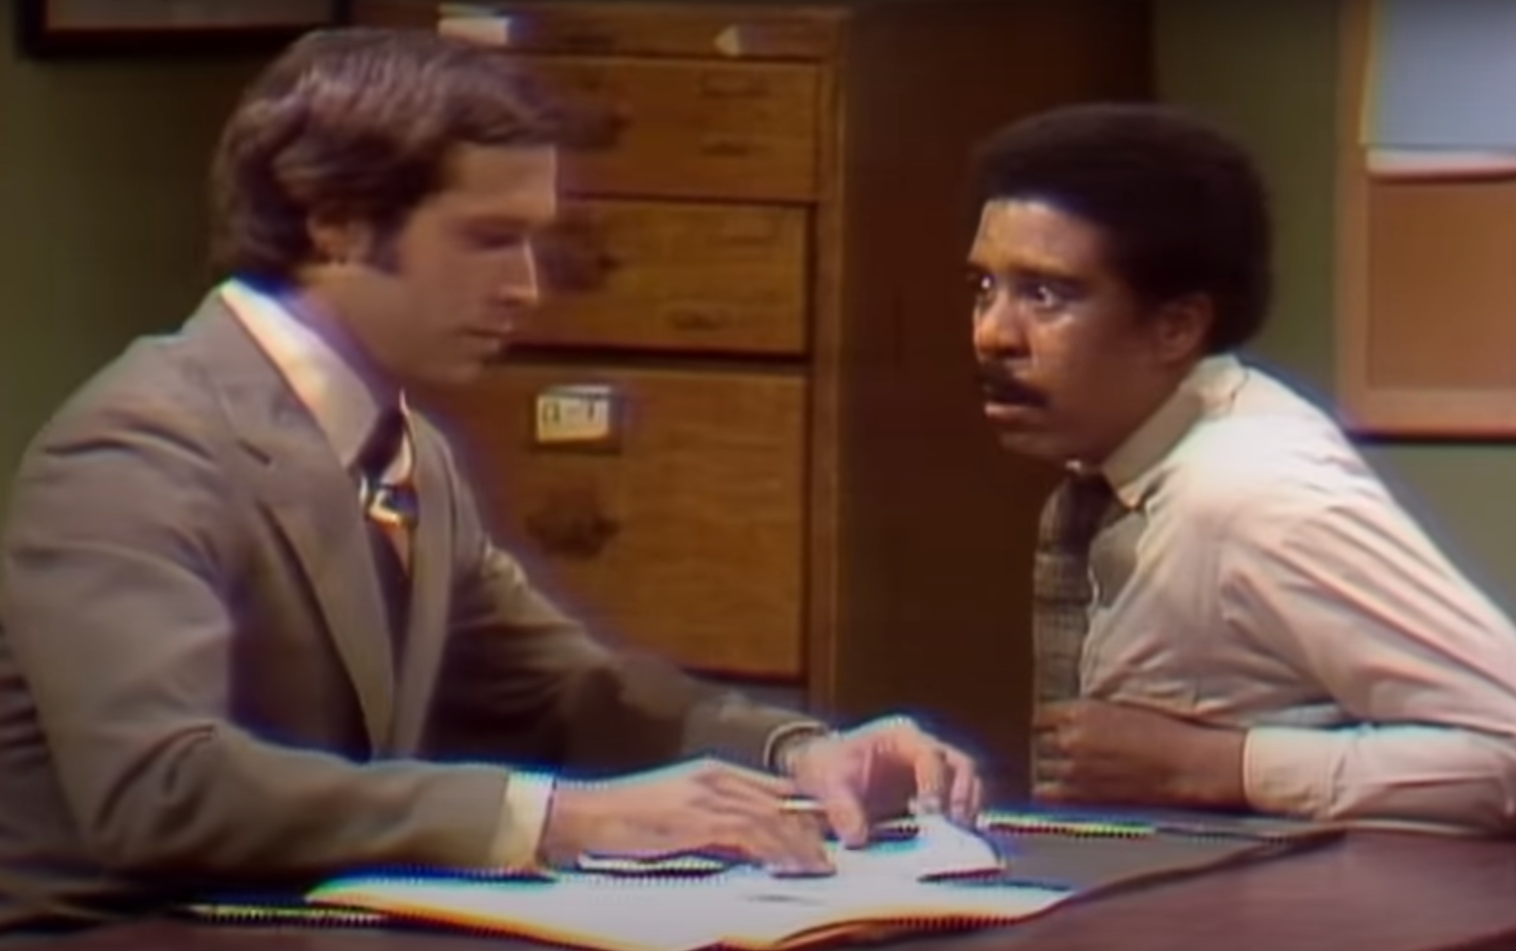 SNL in 1975 had the sharpest edge